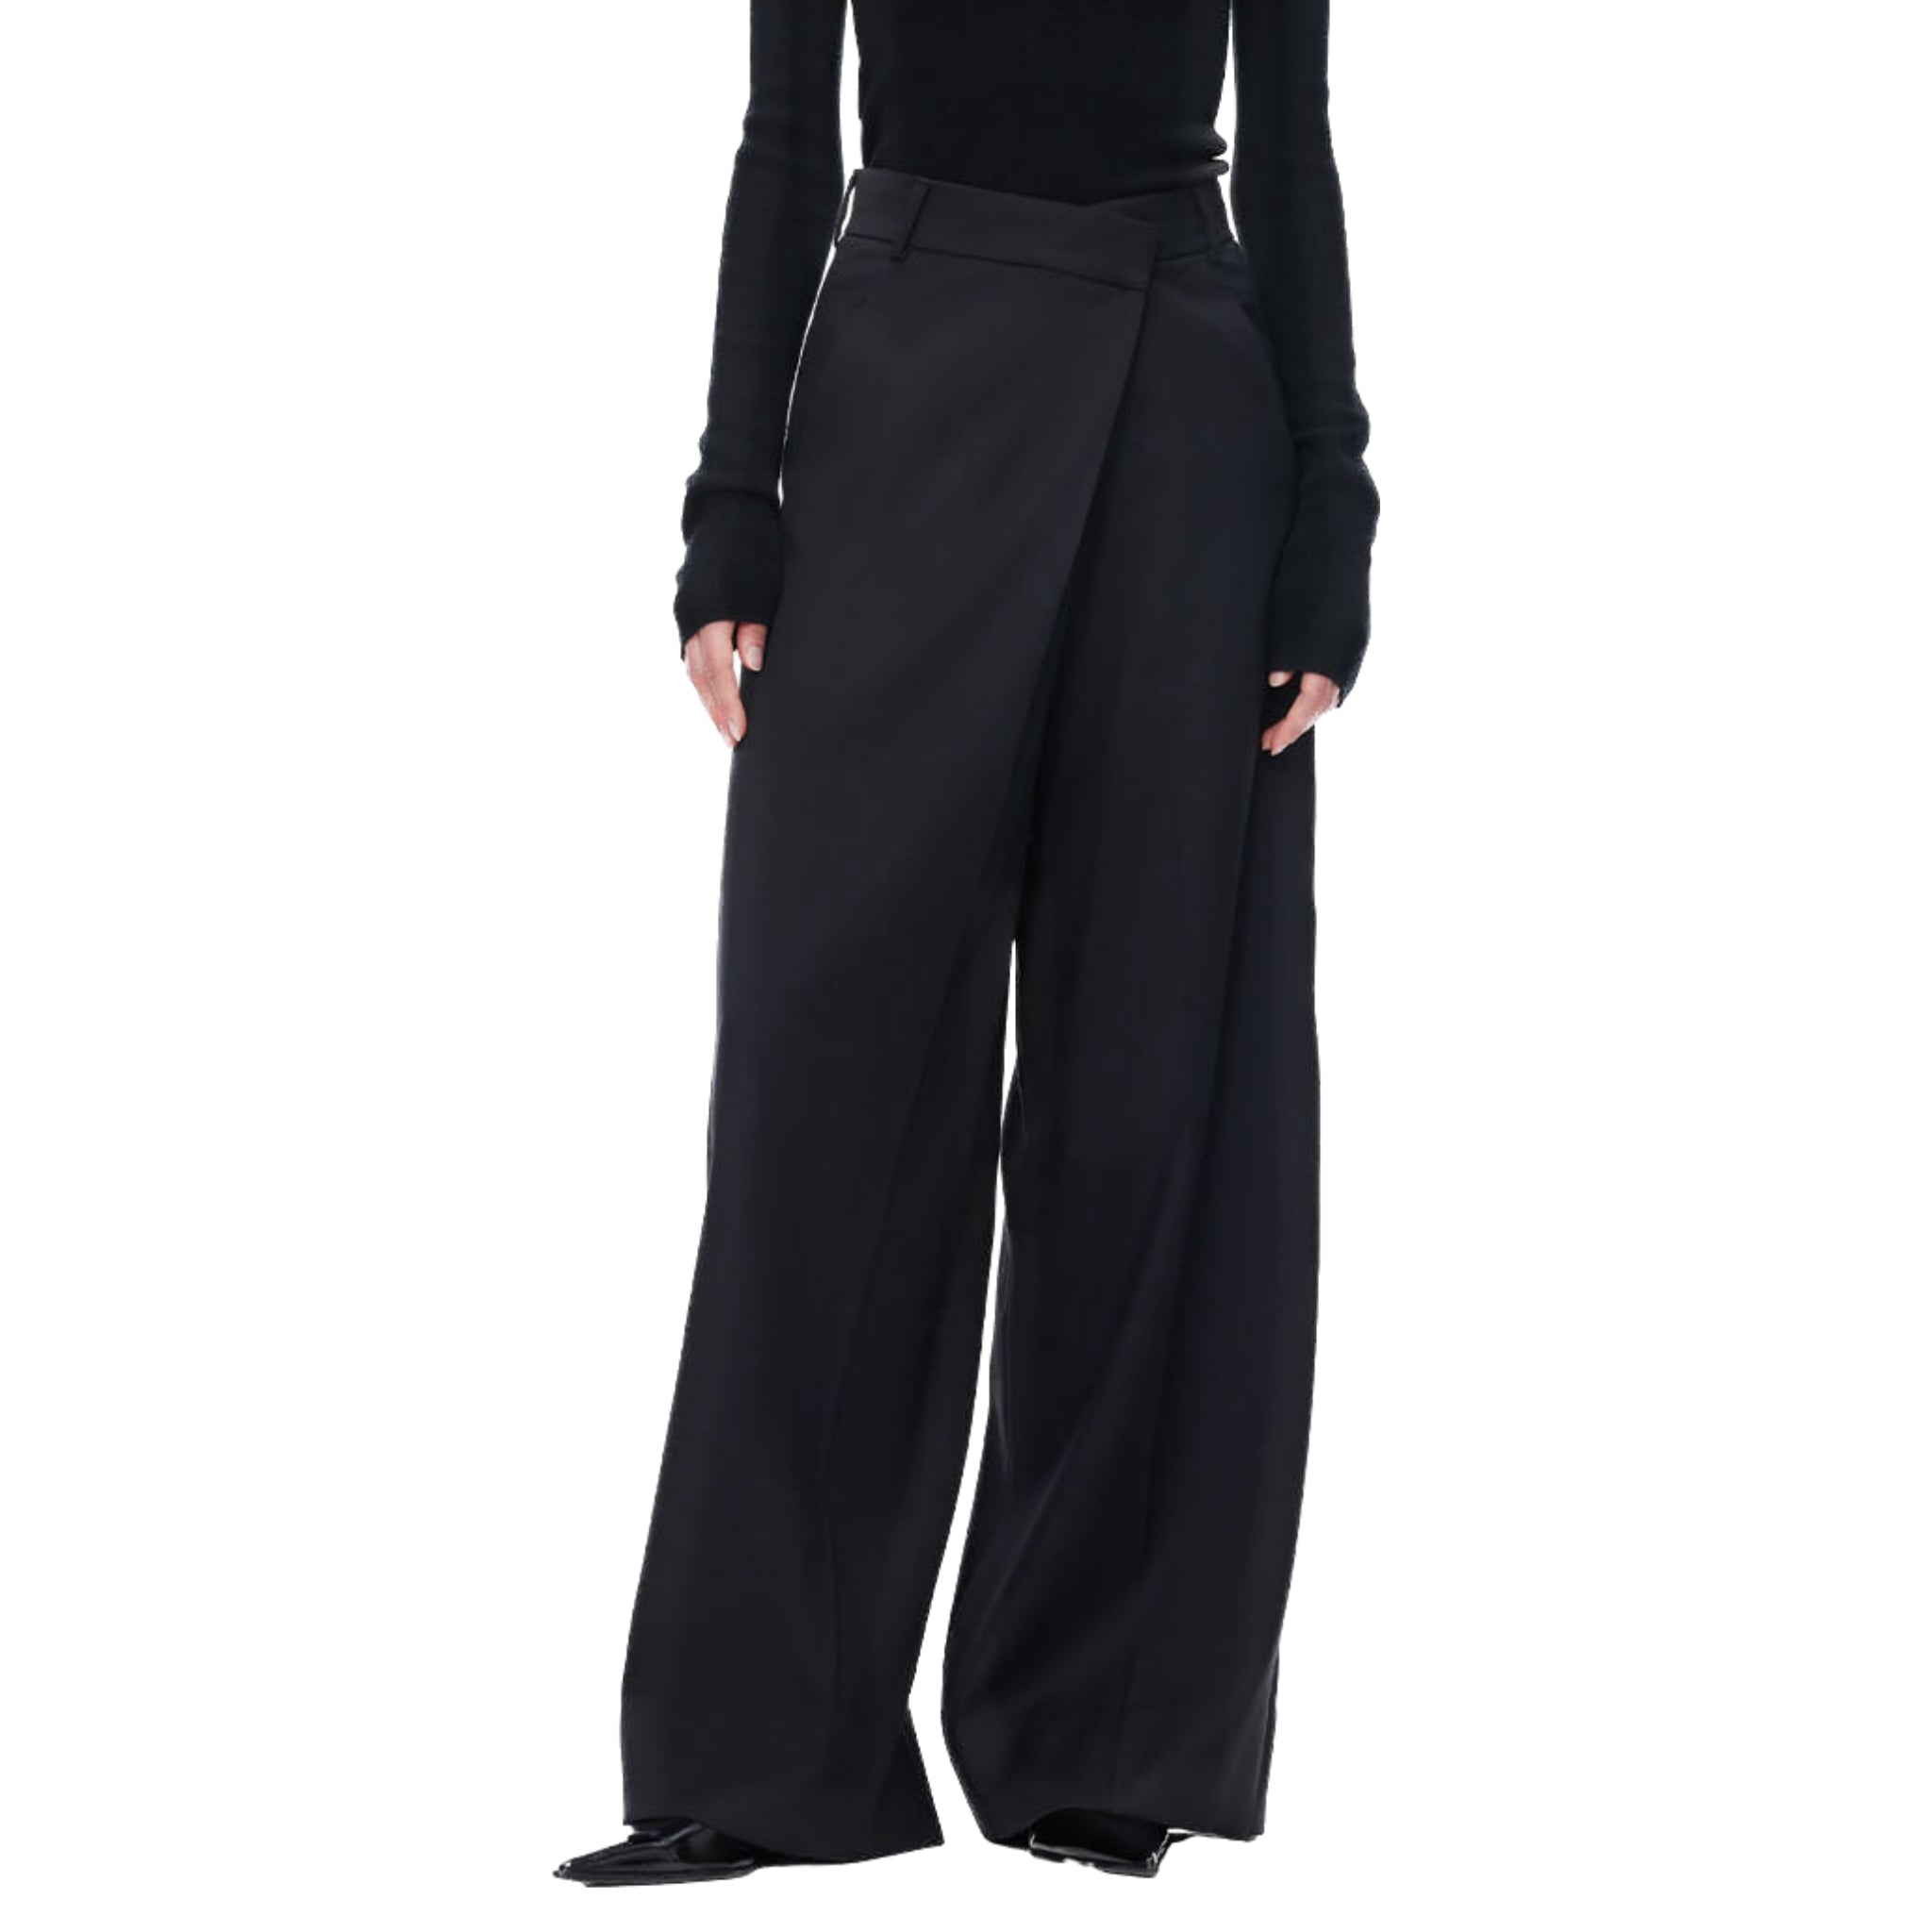 ANN ANDELMAN Black Folded Waist Design Draped Suit Trousers | MADA IN CHINA